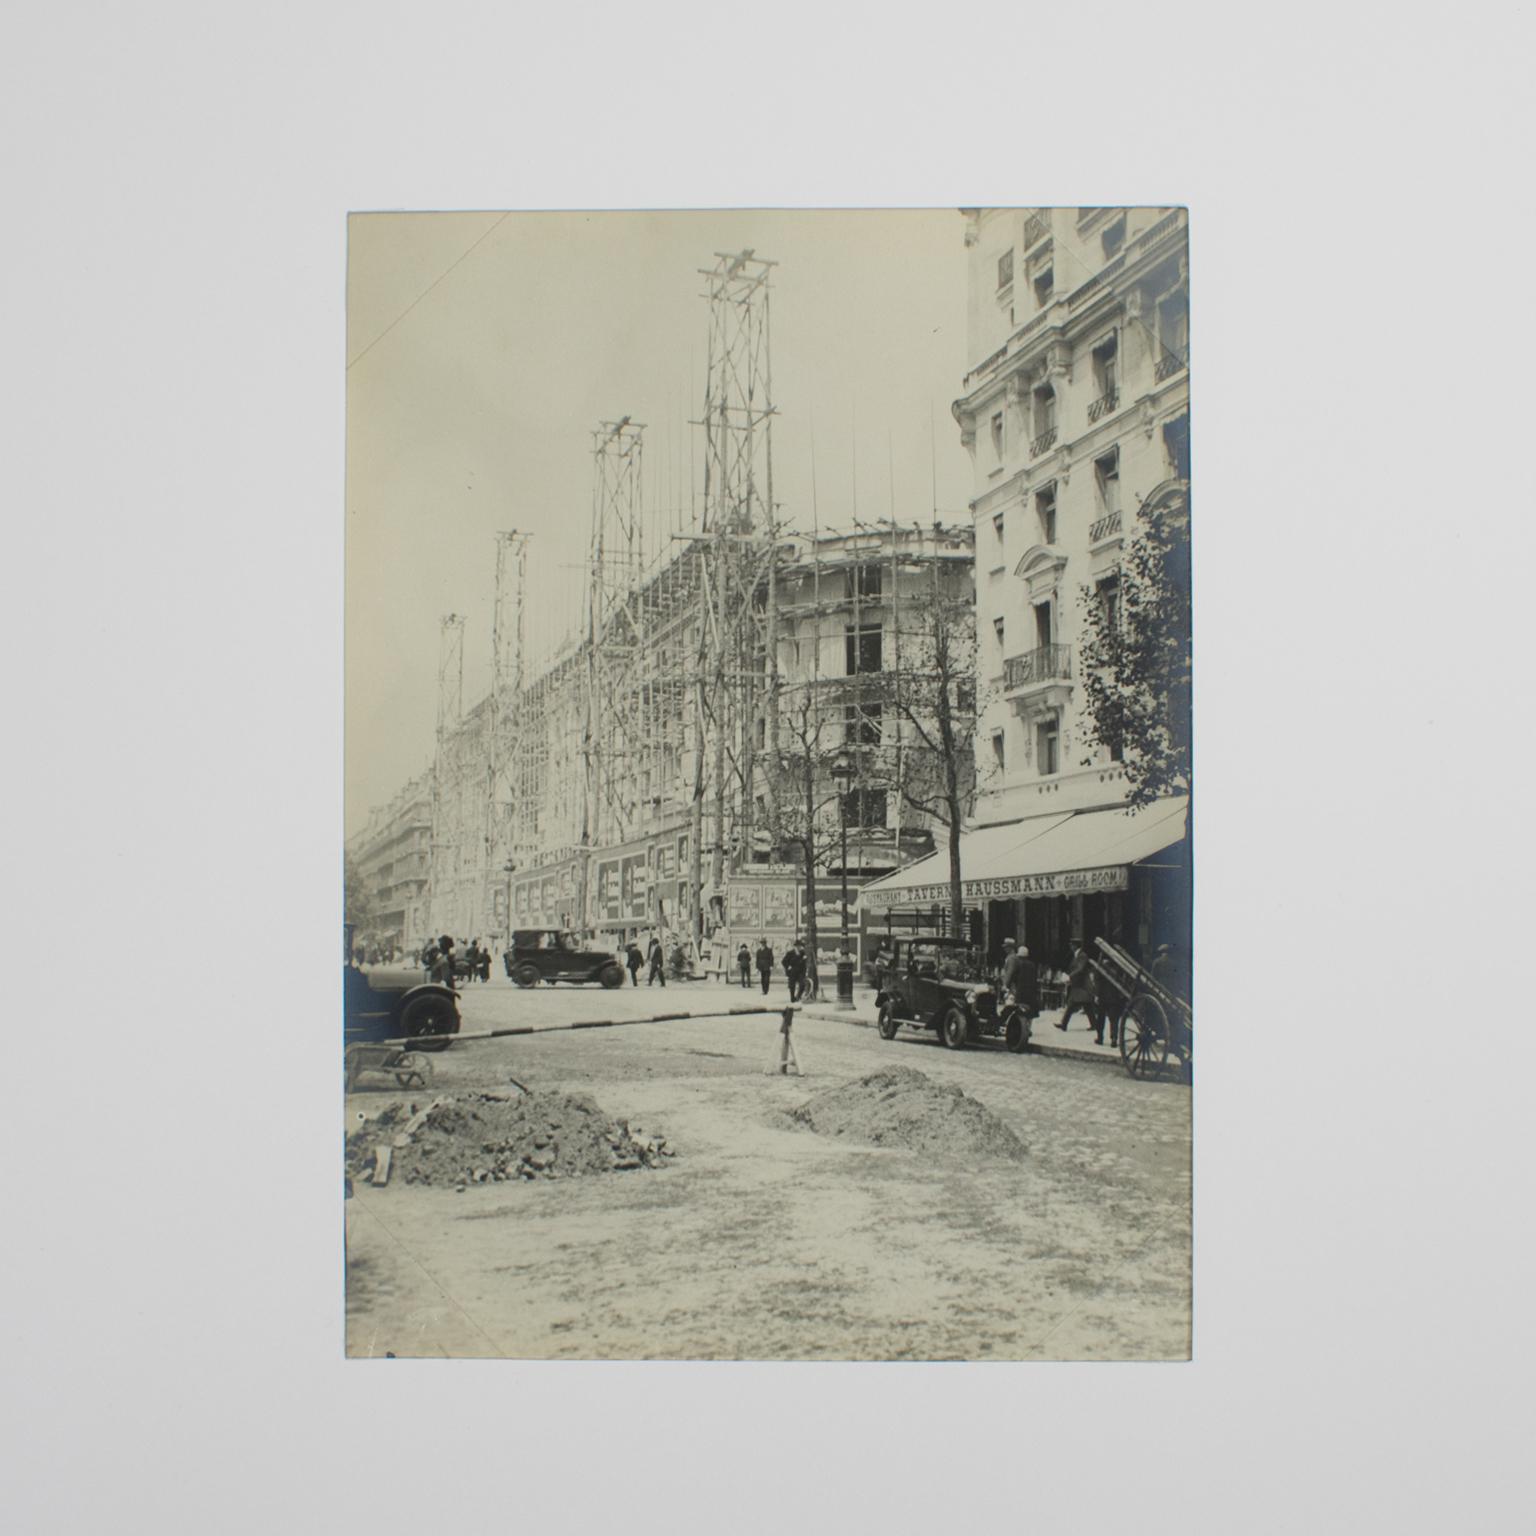 A unique original silver gelatin black and white photography, Boulevard Haussmann in Paris, France, June 1926. 
A view of the Boulevard Haussmann in Paris with buildings under construction, dated June 19th, 1926. On the right side of the photograph